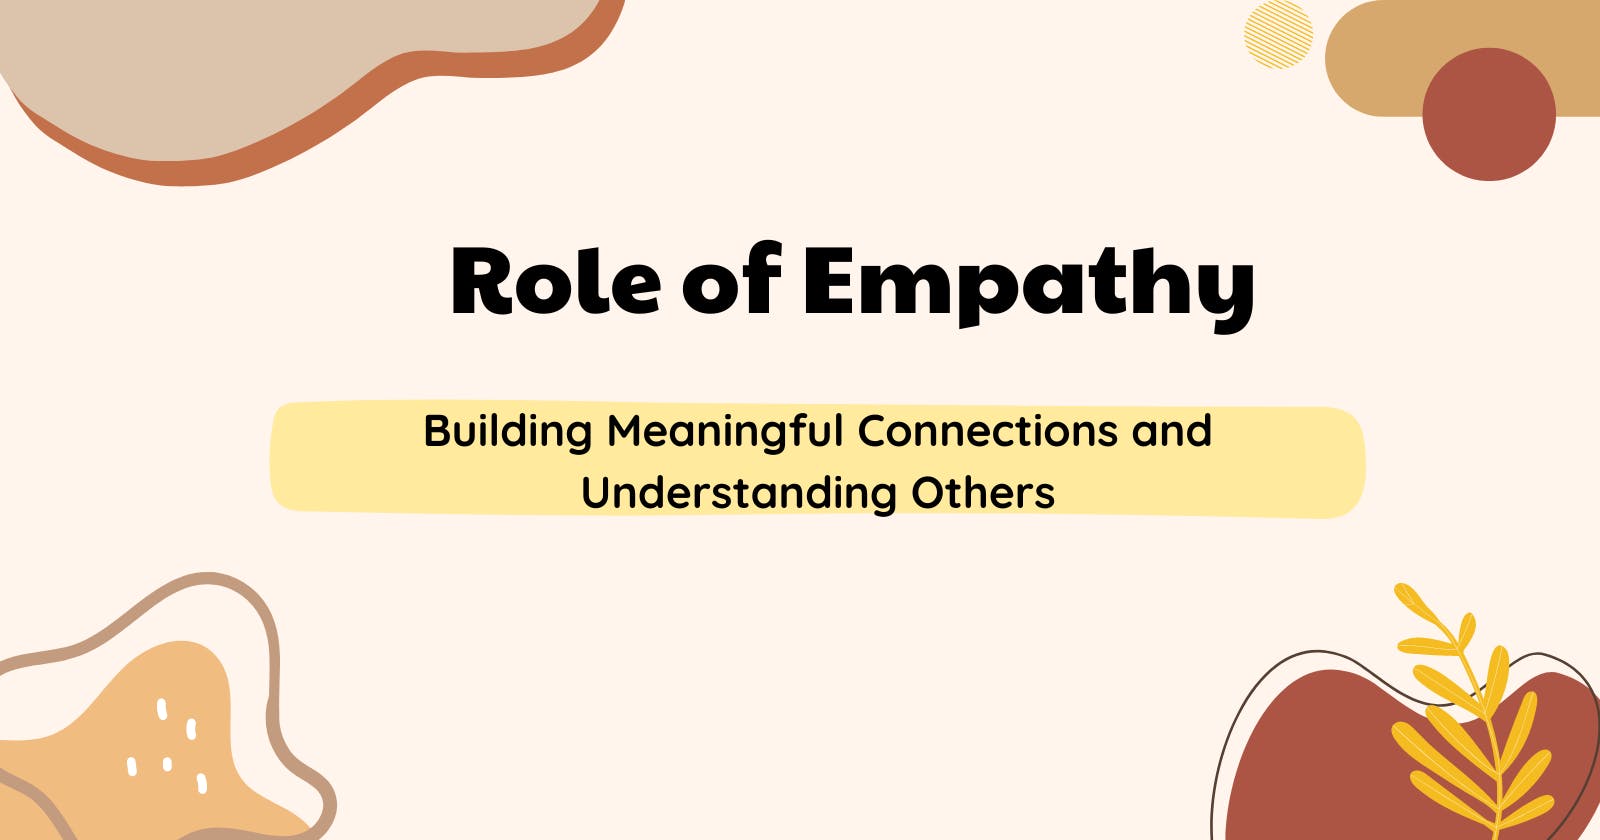 The Role of Empathy in Building Meaningful Connections and Understanding Others 🤝